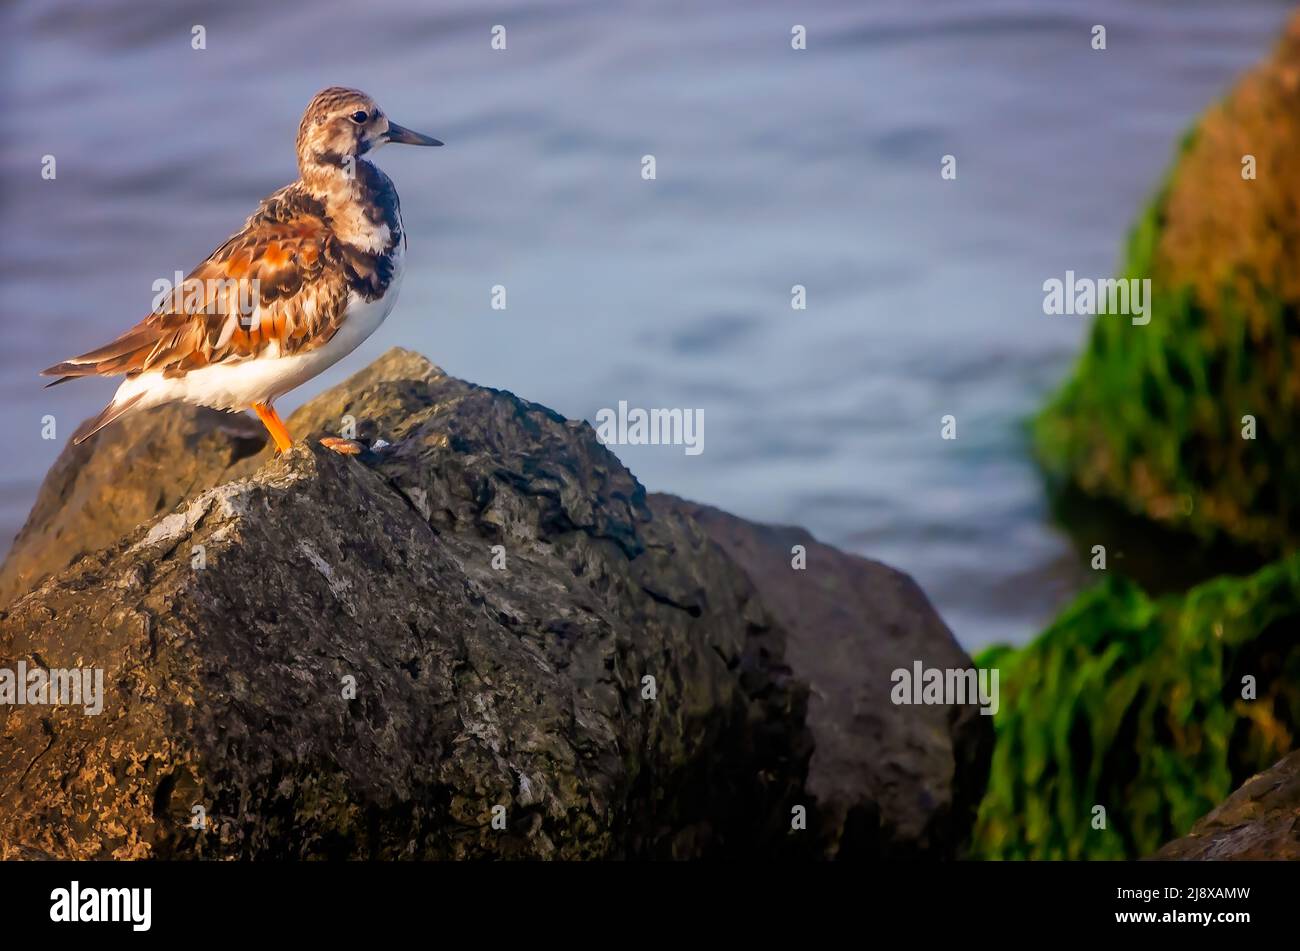 A ruddy turnstone (Arenaria interpres), a type of sandpiper, stands on a rock jetty, April 28, 2022, in Dauphin Island, Alabama. Stock Photo